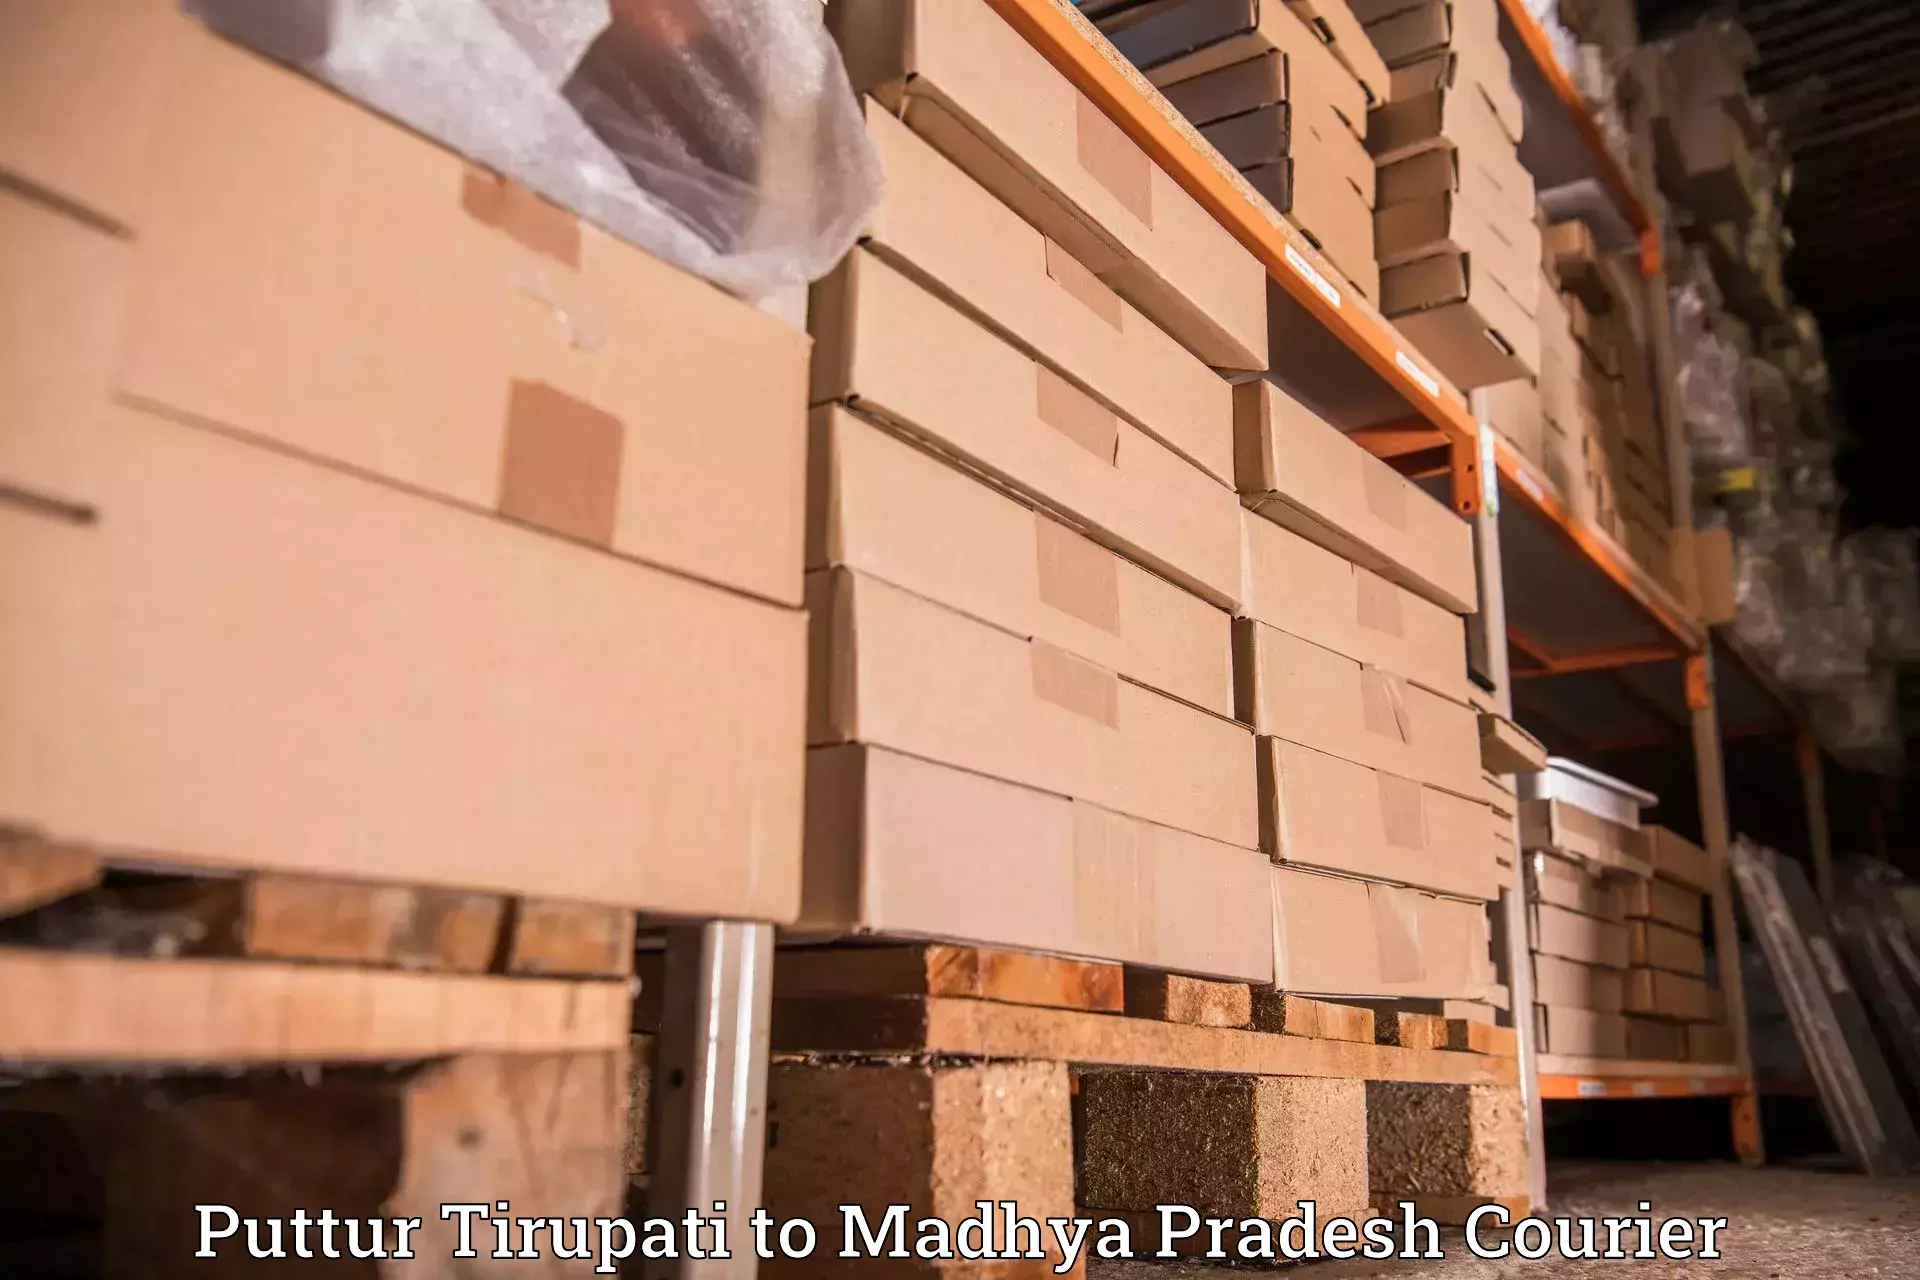 Efficient shipping operations in Puttur Tirupati to Pachore